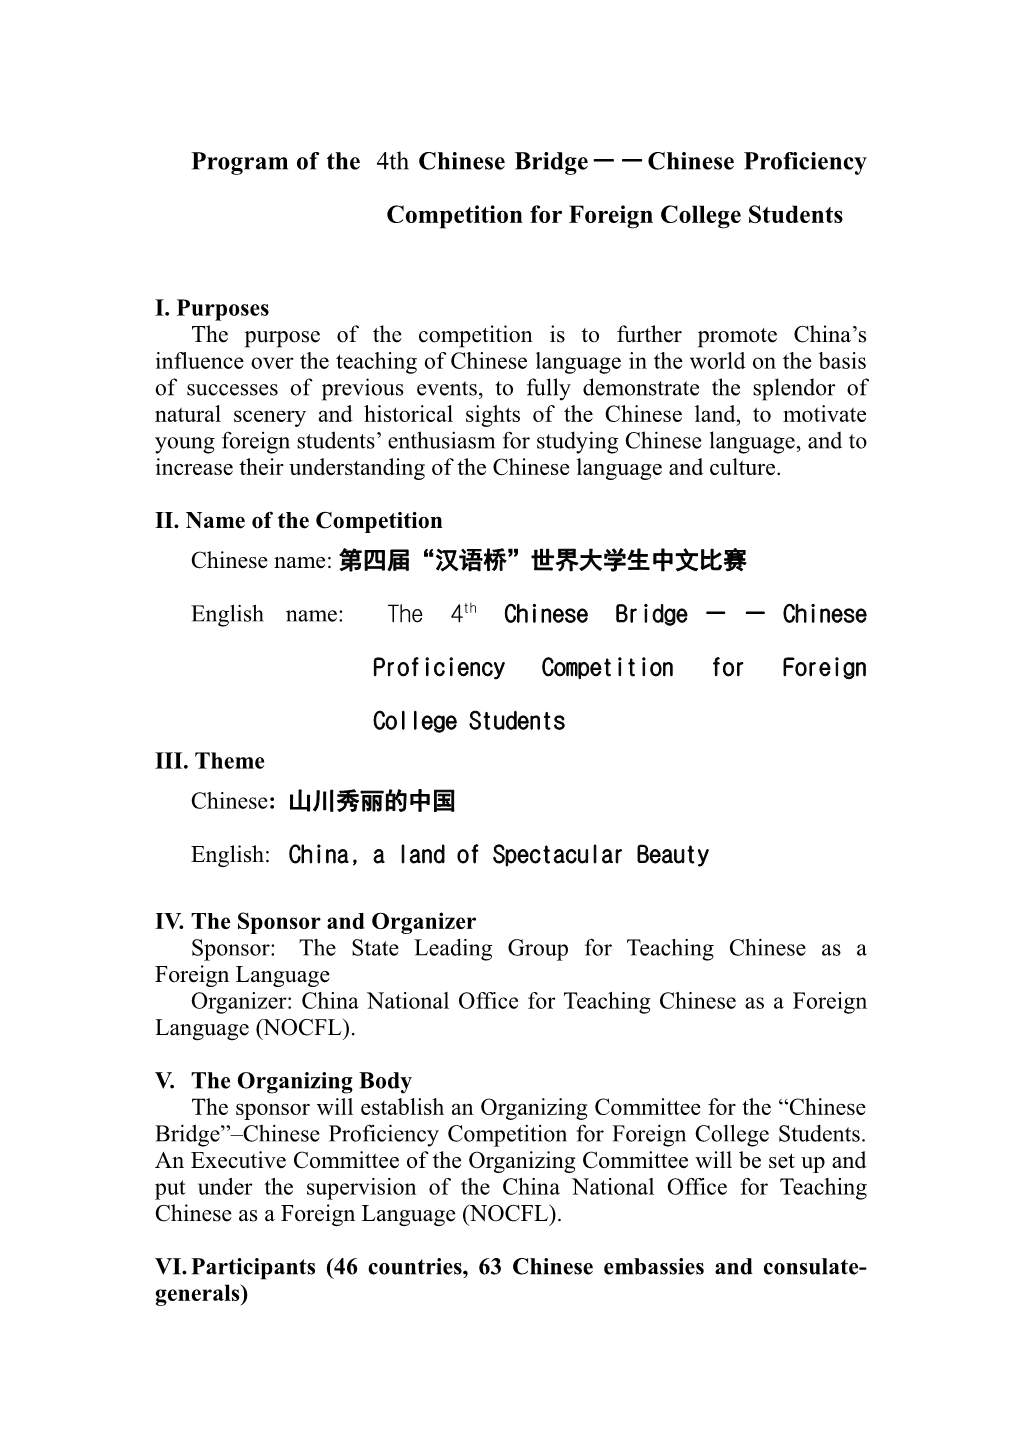 Program of the 3Rd Chinese Bridge Chinese Proficiency Competition for Foreign College Students